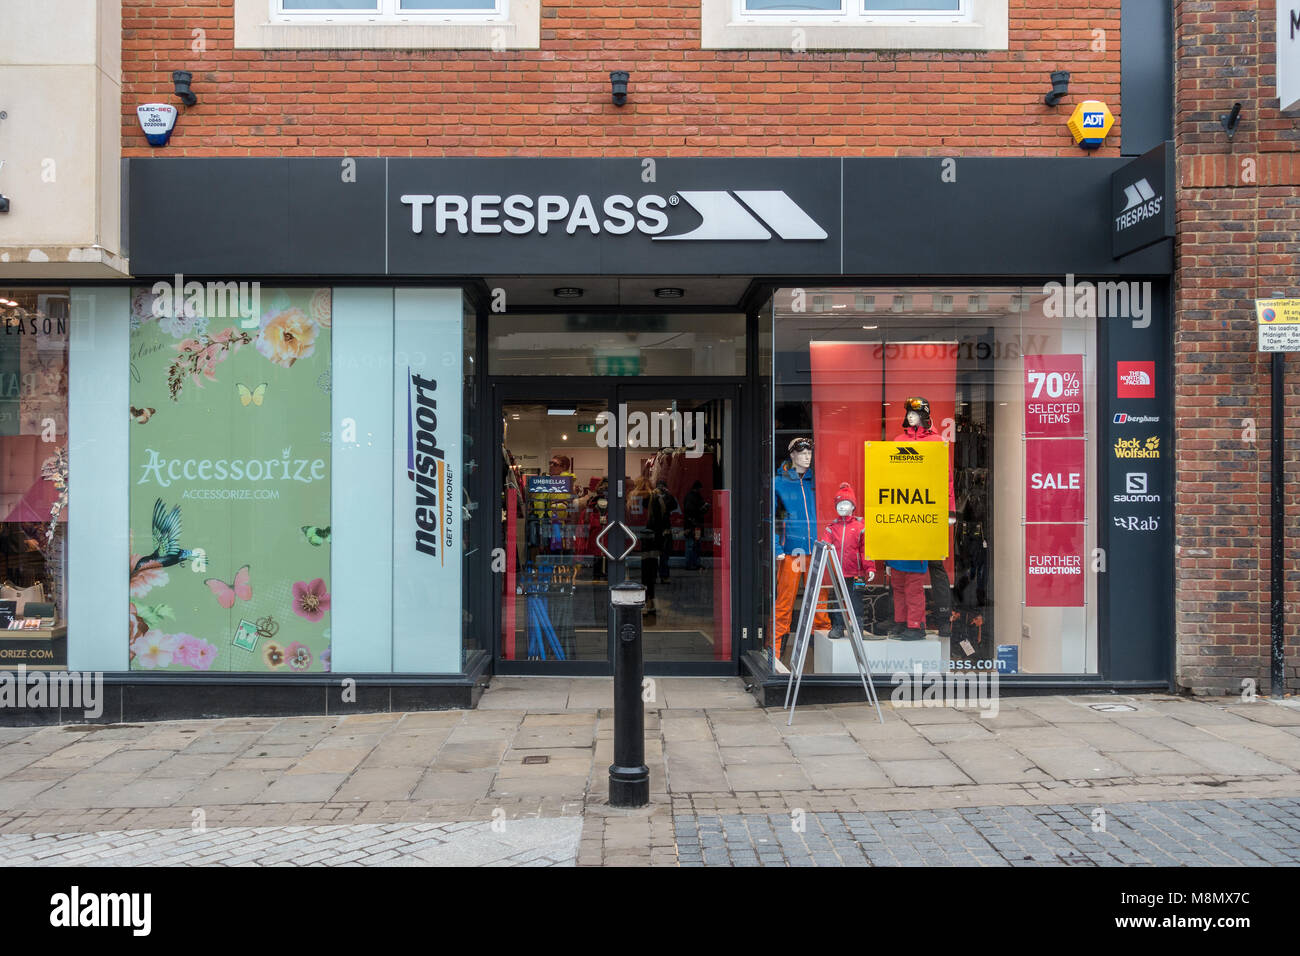 A Trespass store on Peascod Street in Windsor. The shop sells goods for outdoor pursuits and sports. Stock Photo